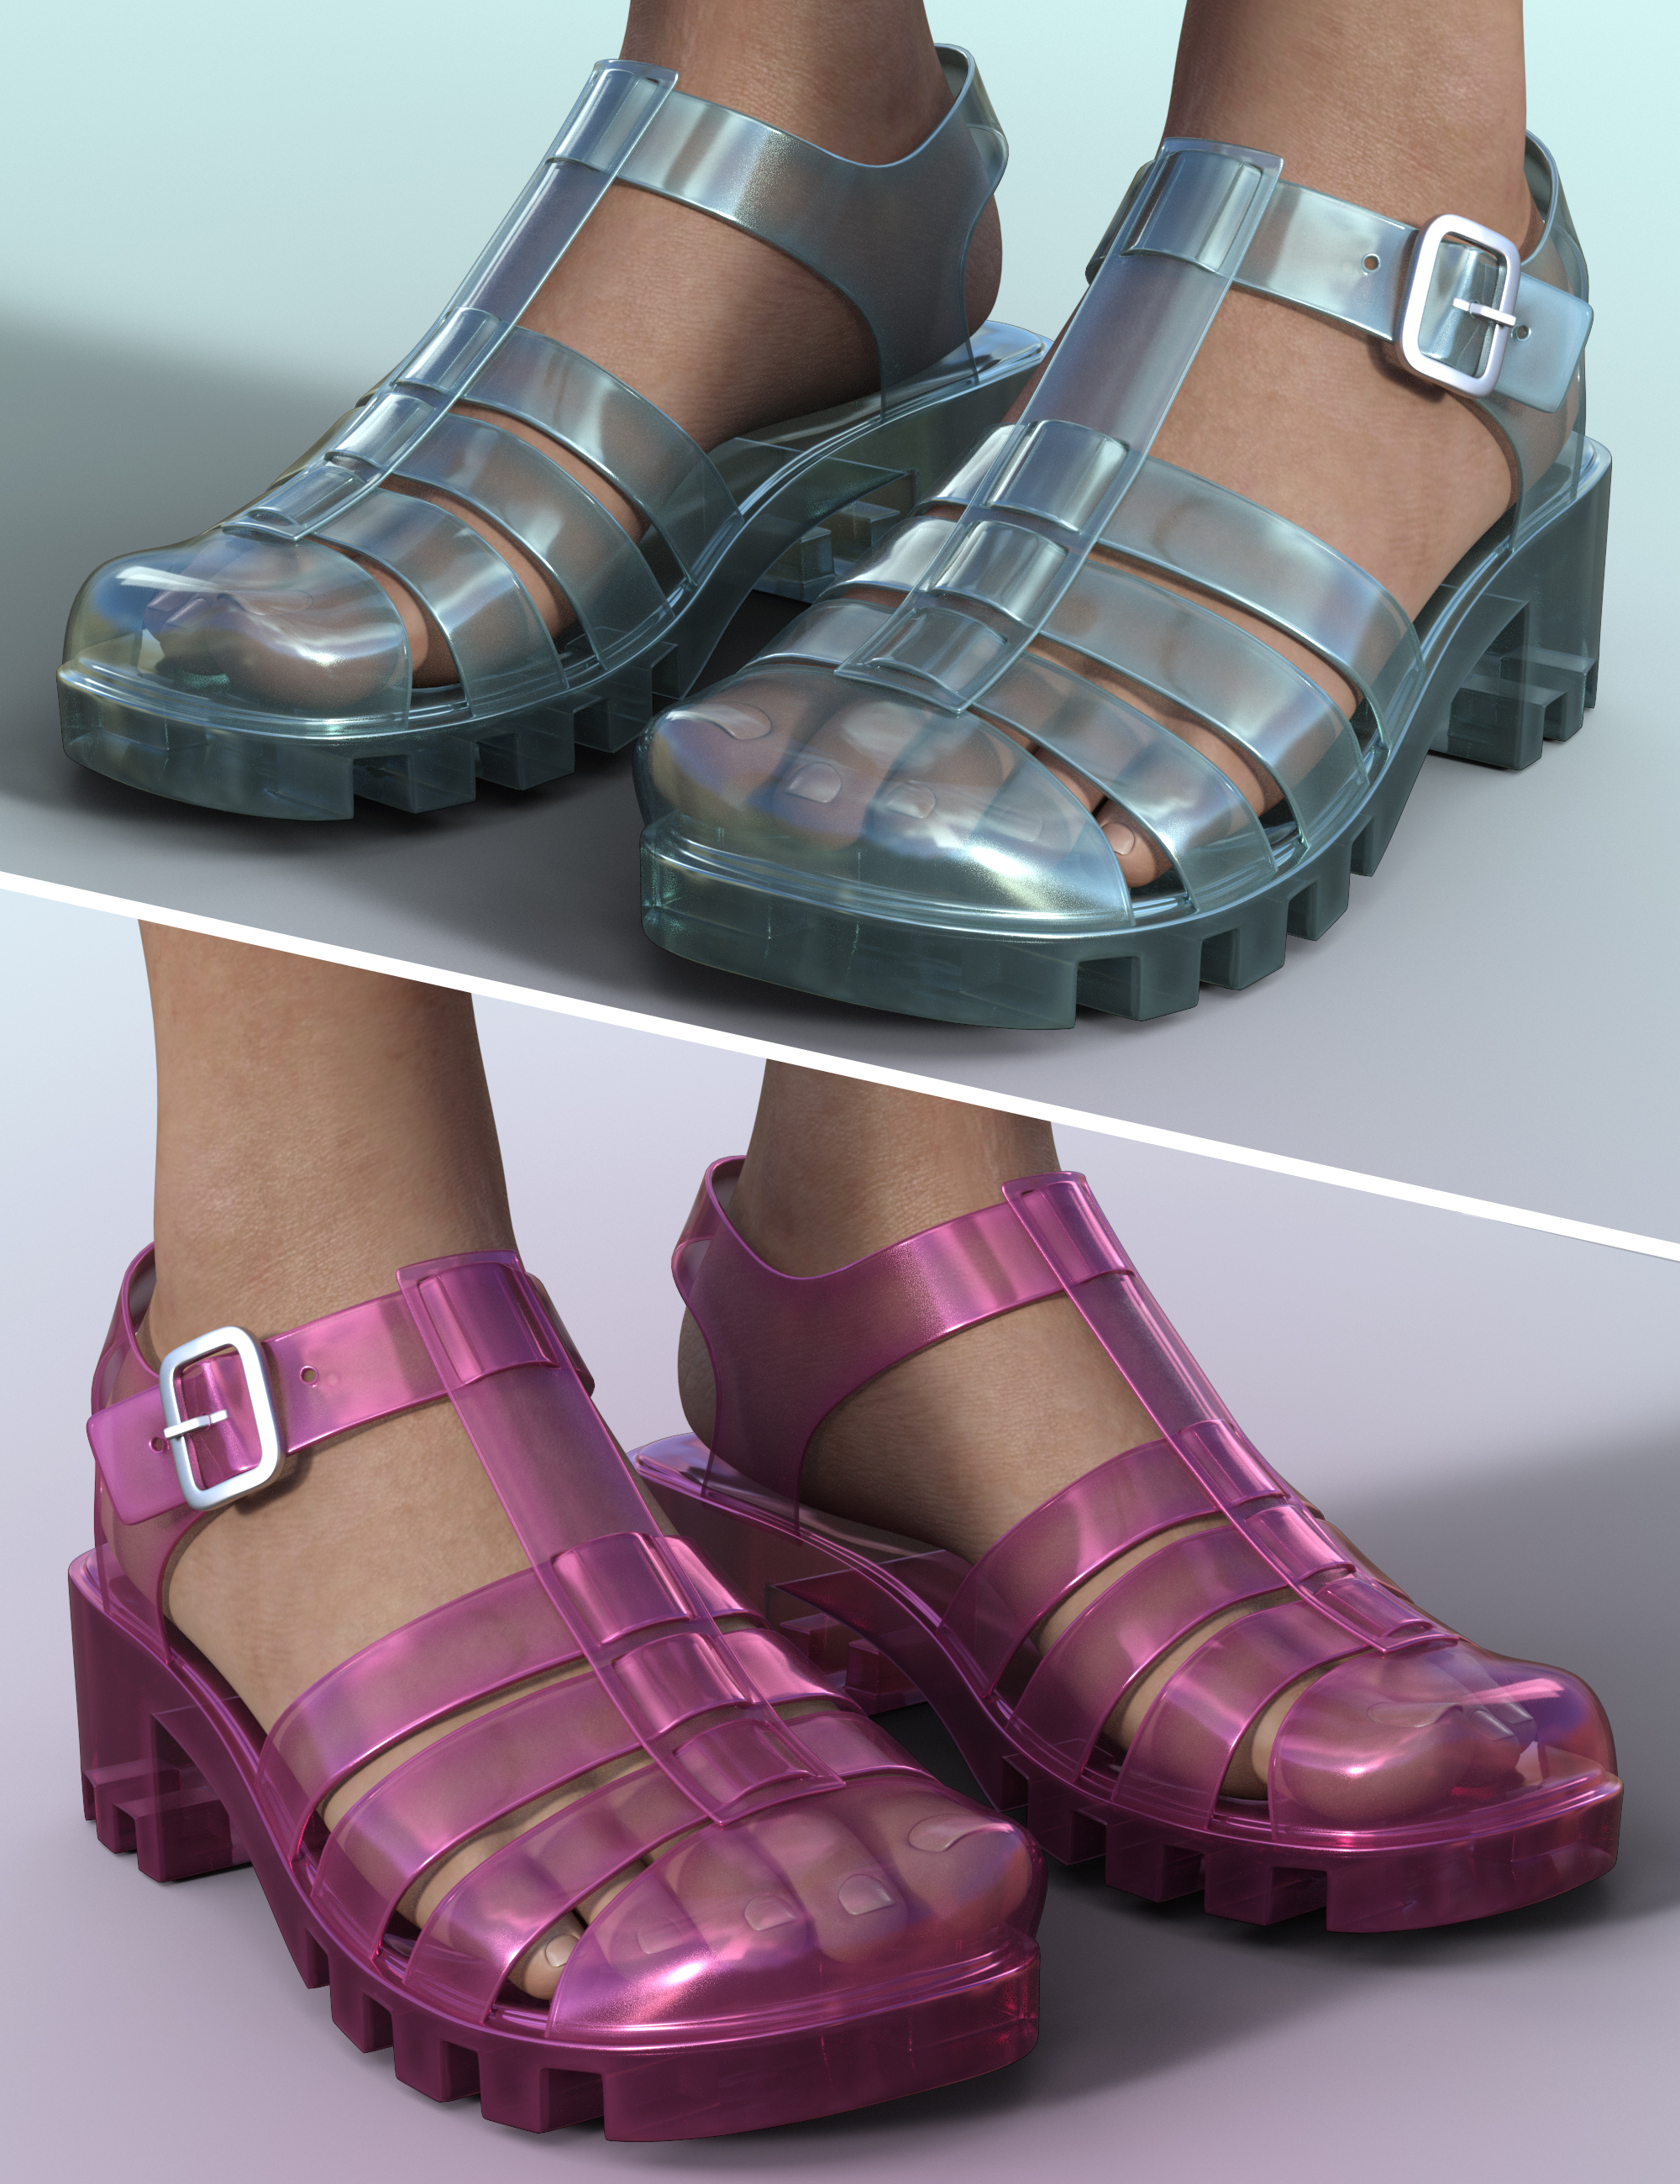 90's Jelly Sandals for Genesis 8 Females | Daz 3D